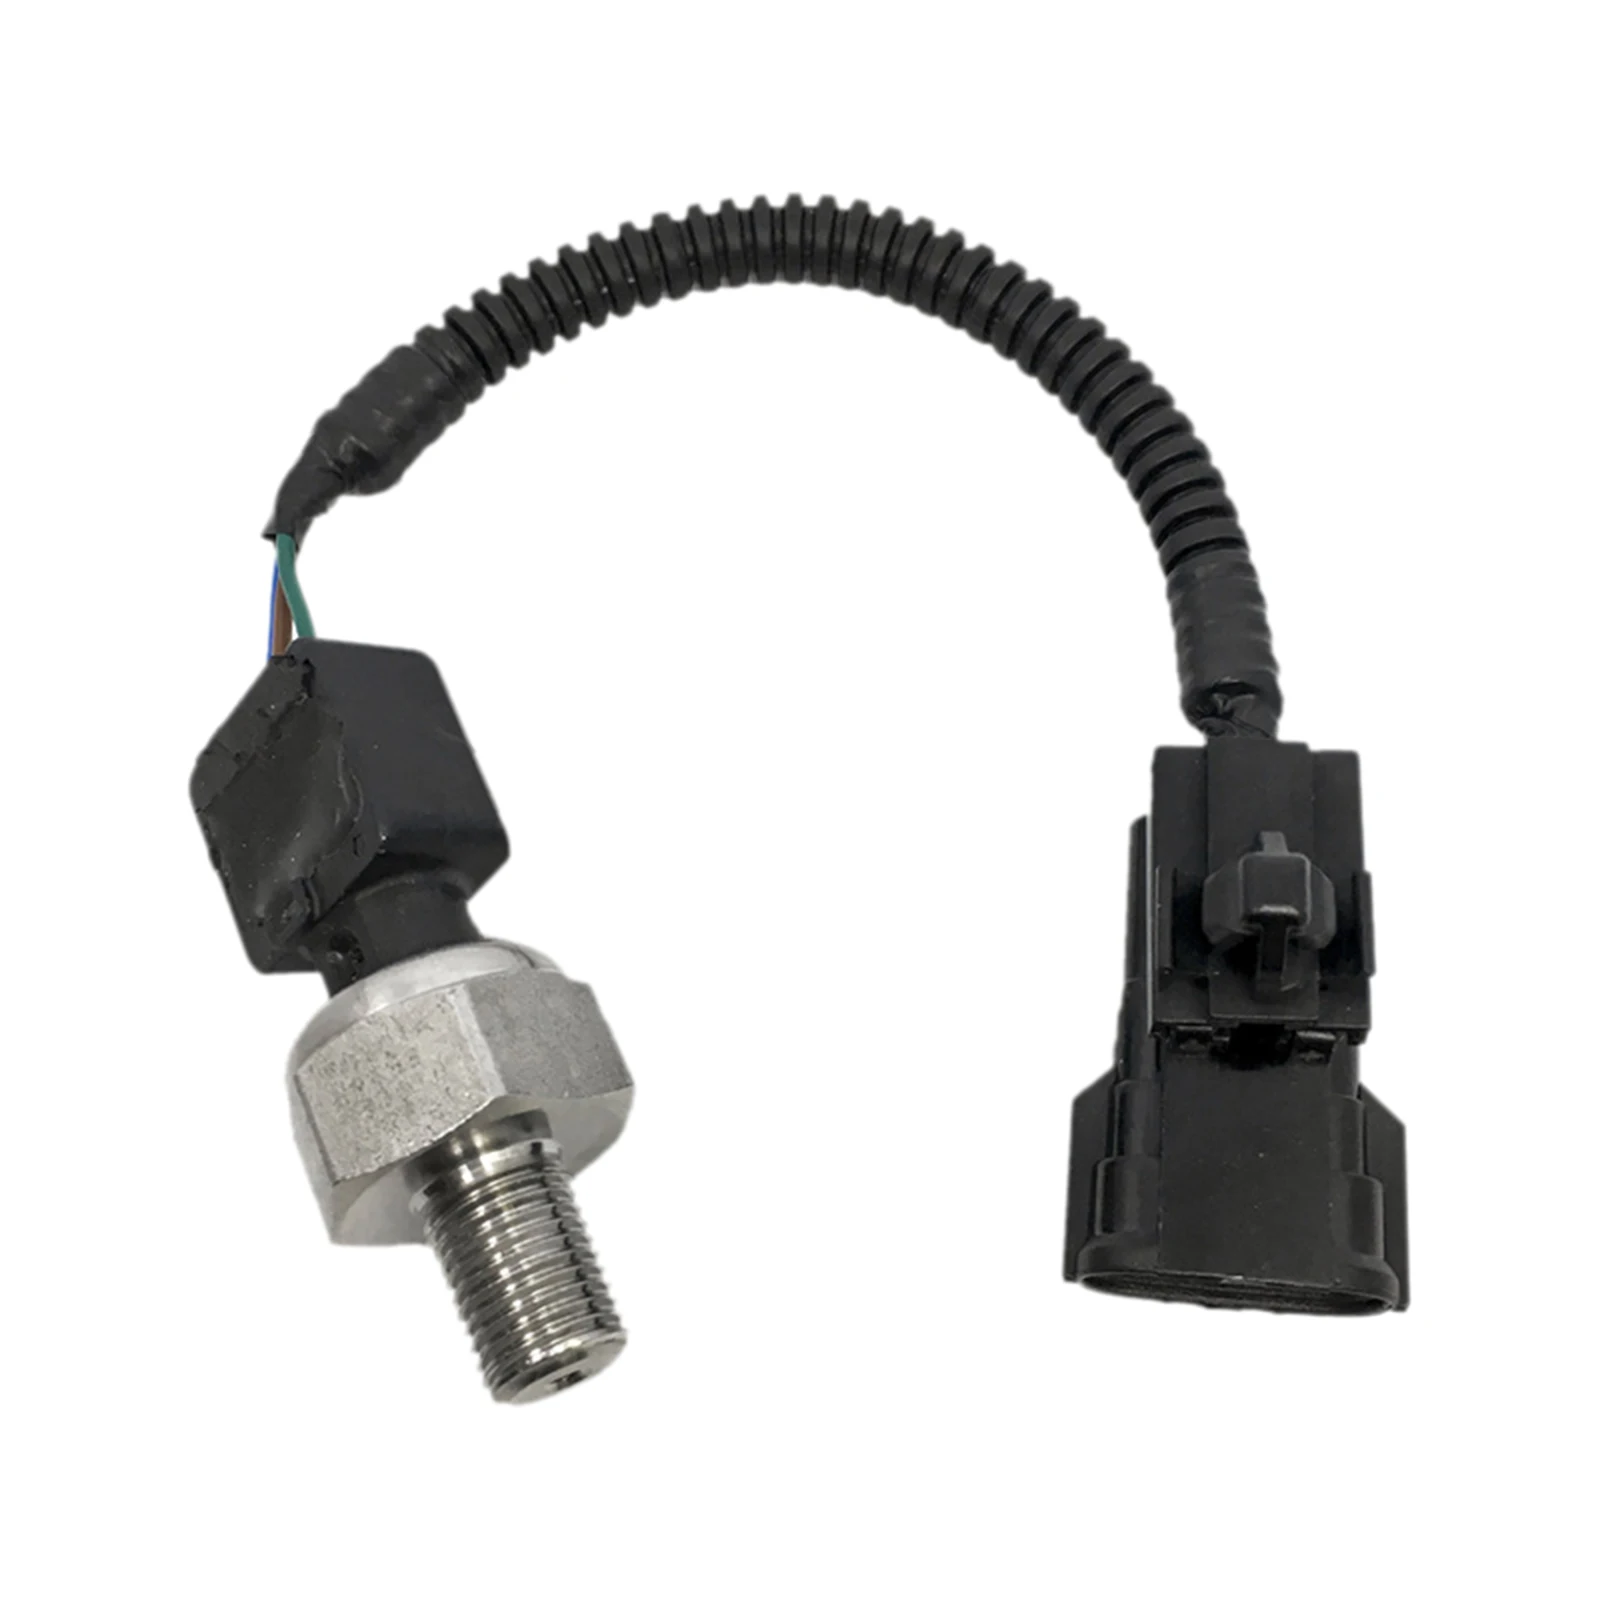 Fuel Pressure Sensor for Lexus IS250 IS350 GS300 GS430 8945830010 Replace